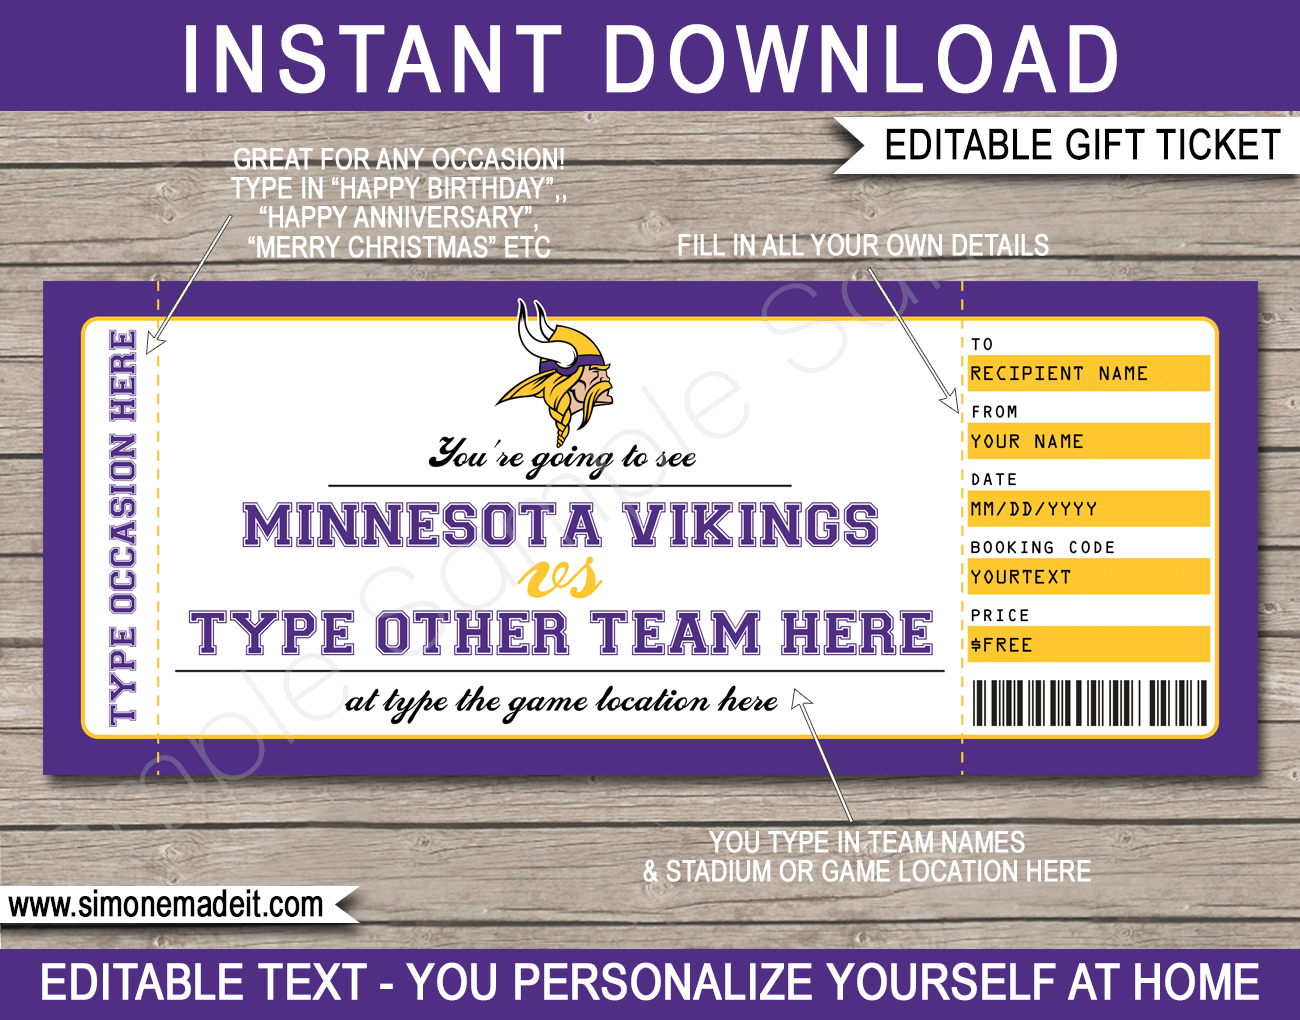 Ticket to football game between the Minnesota Vikings and the